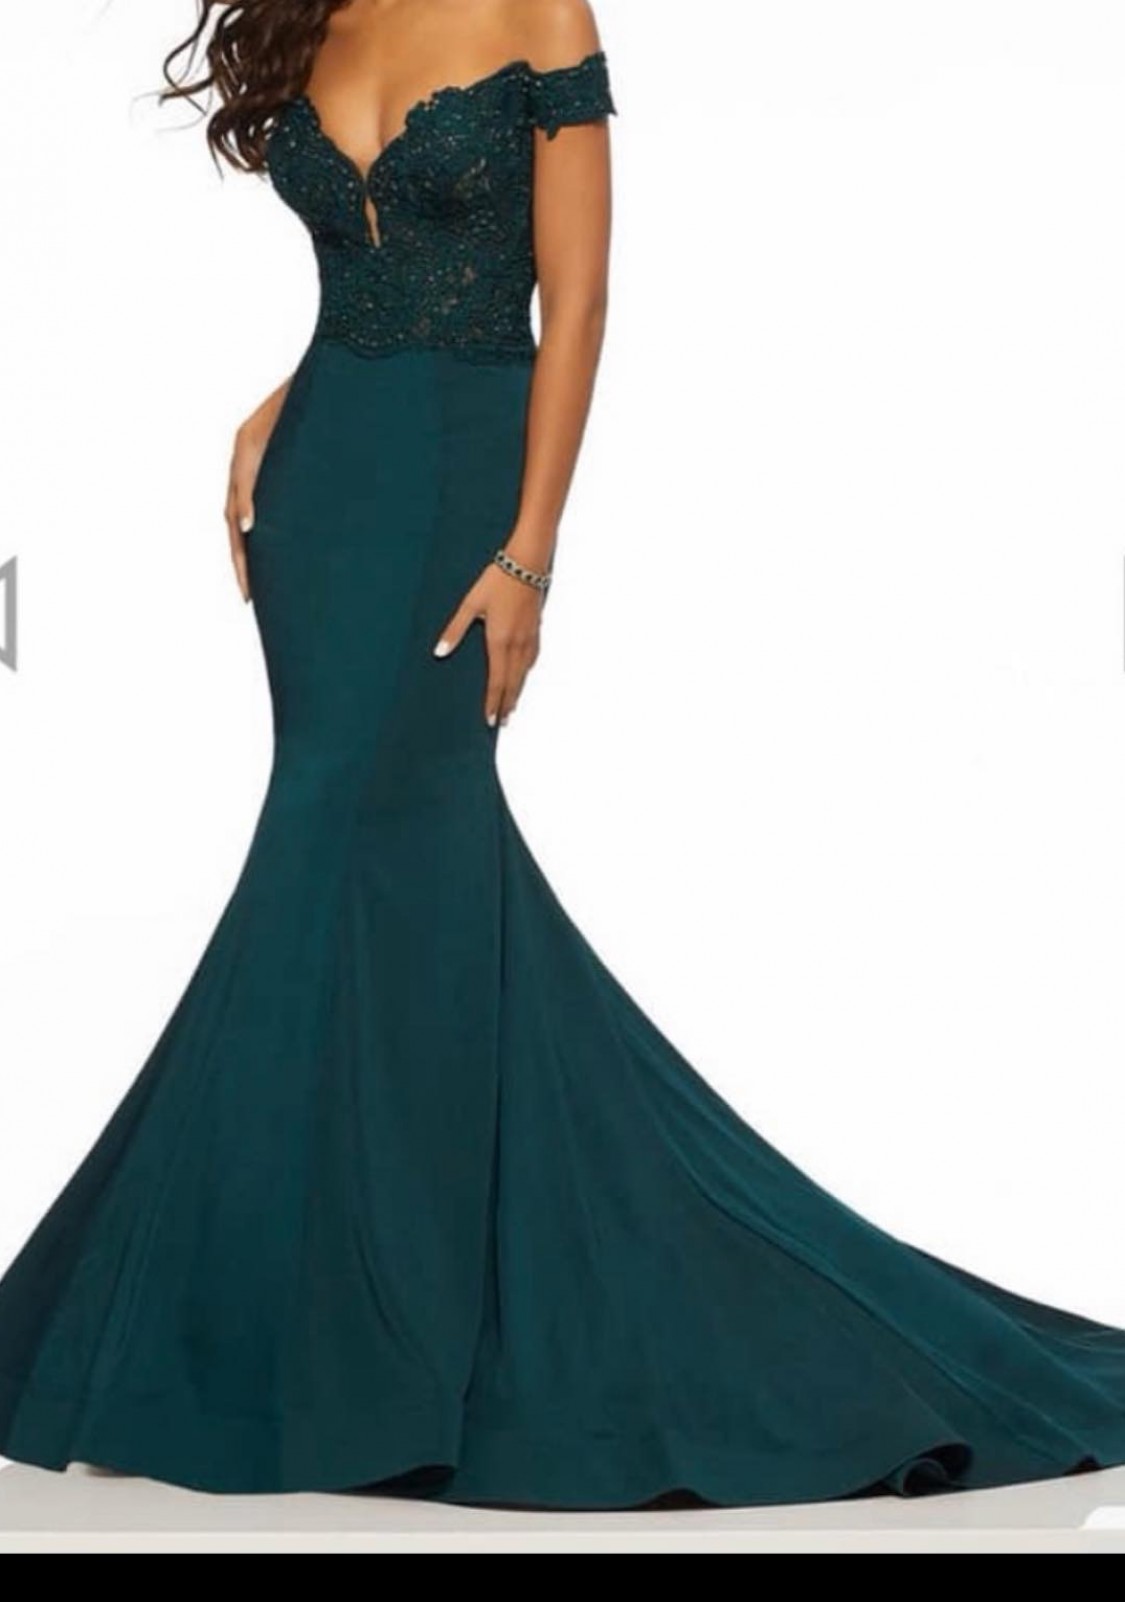 Green off the shoulder dress by Mori Lee